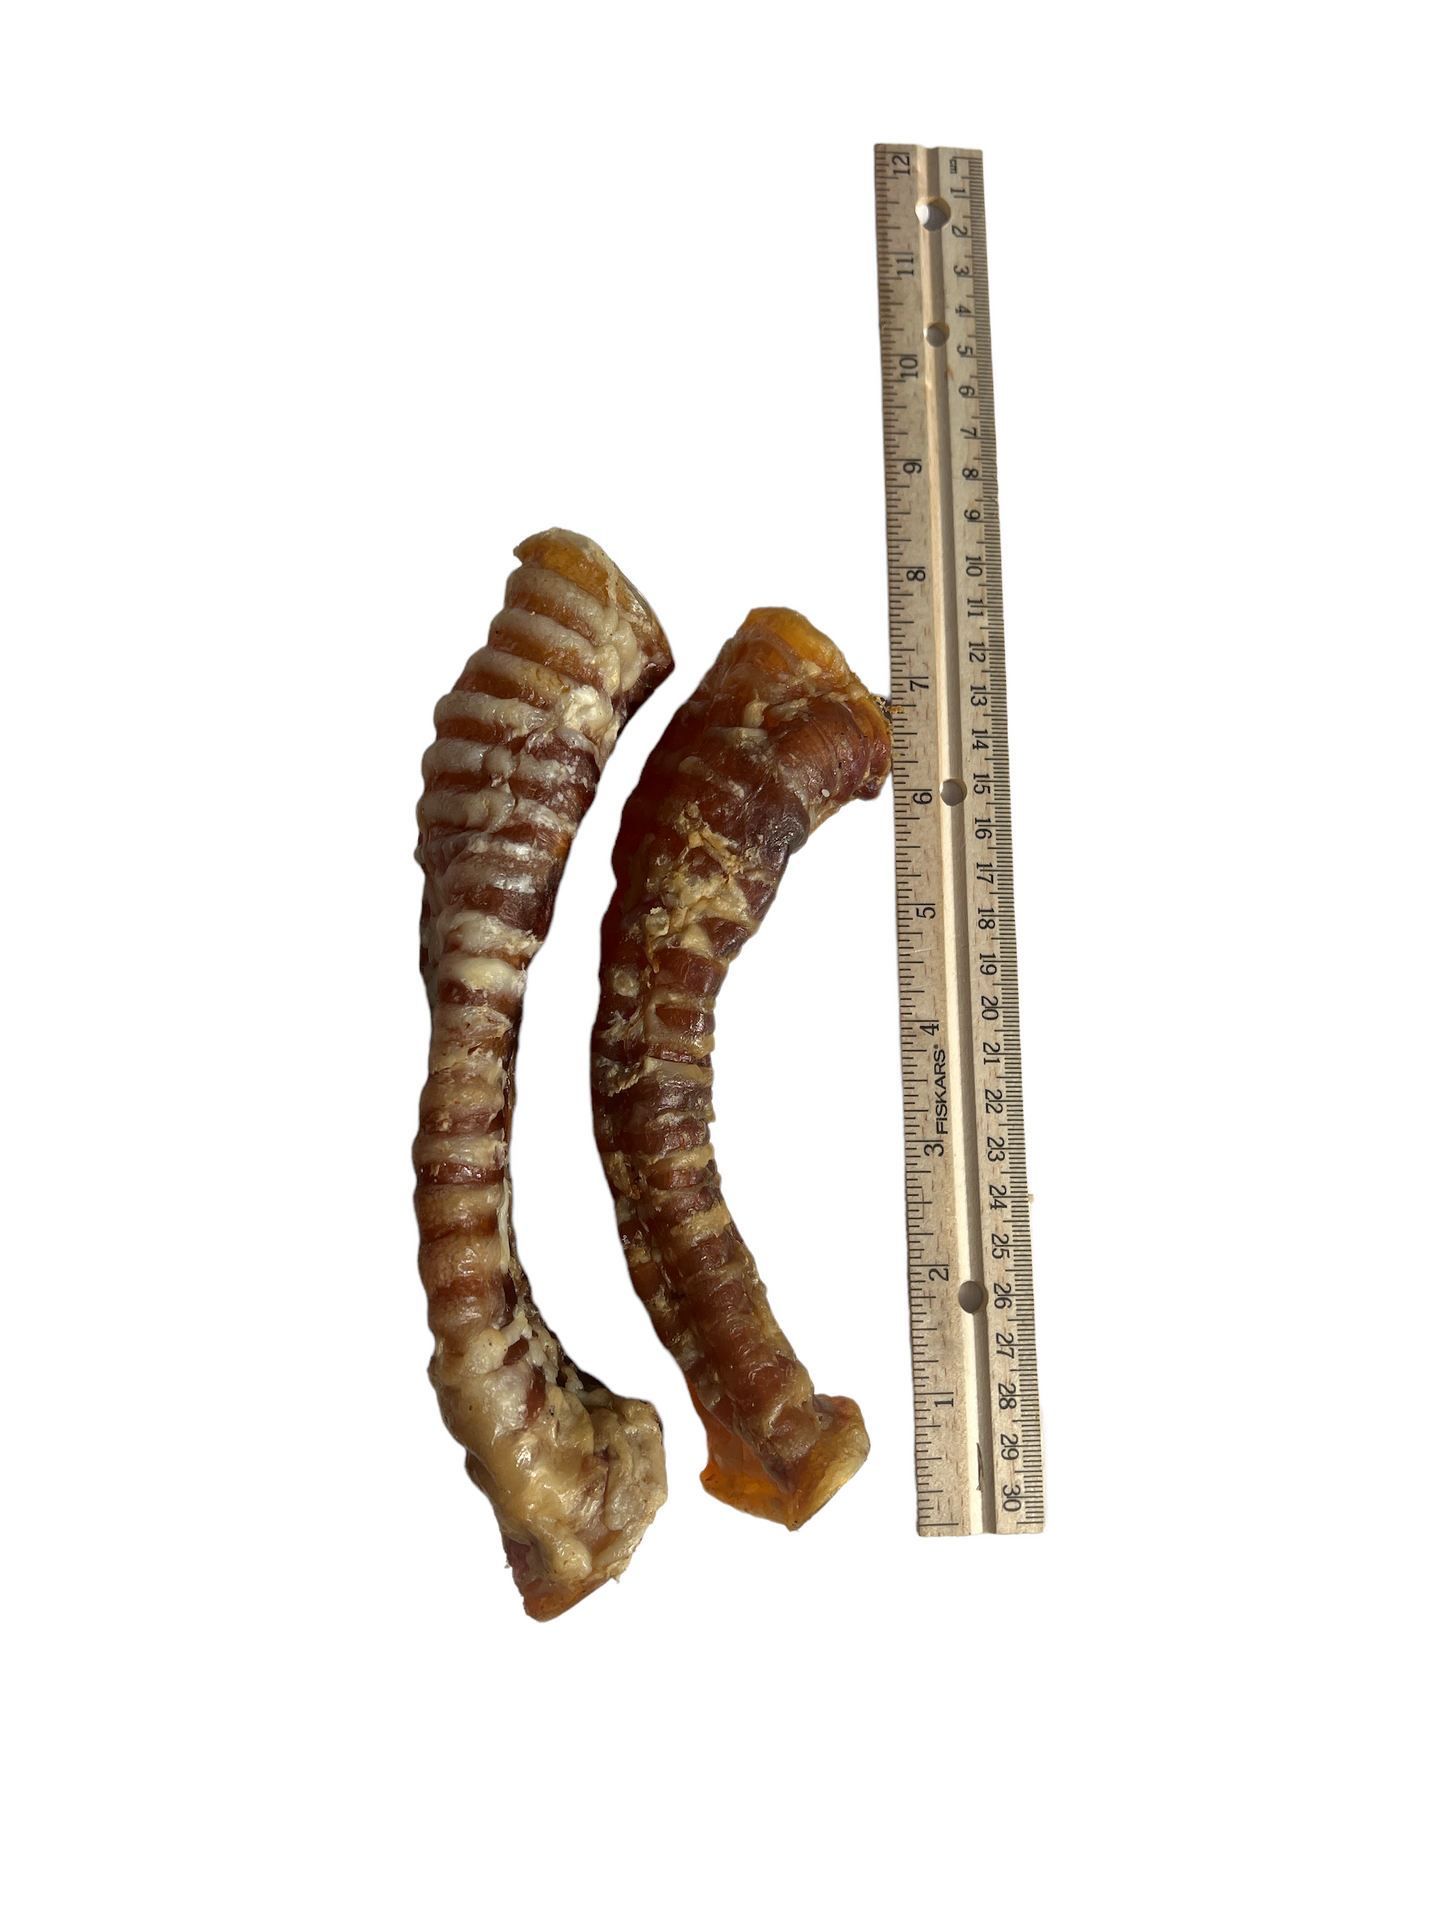 6-9 inch dehydrated beef trachea treats for dogs